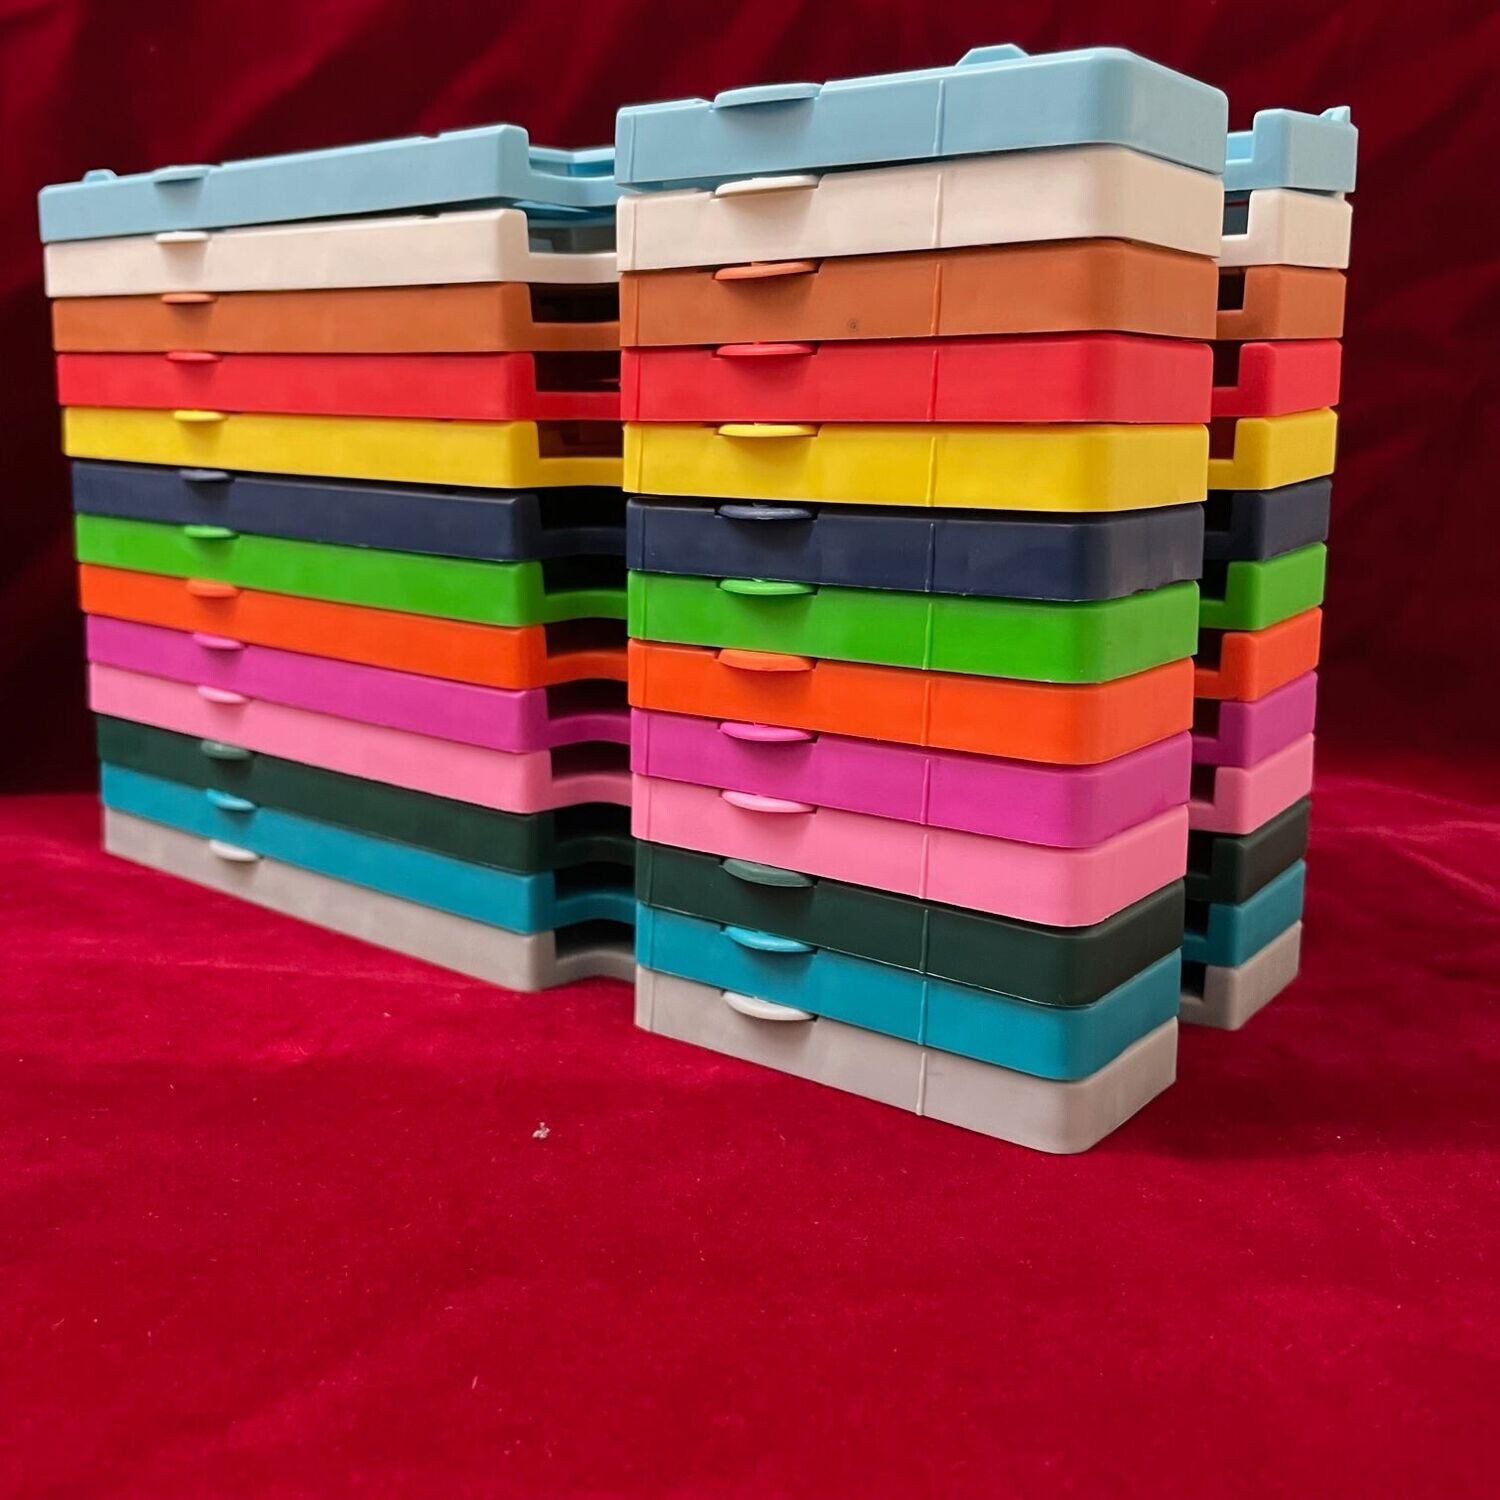 PlayBridge Dealing Boards Numbered 1-32 (Click photo to choose colour option)